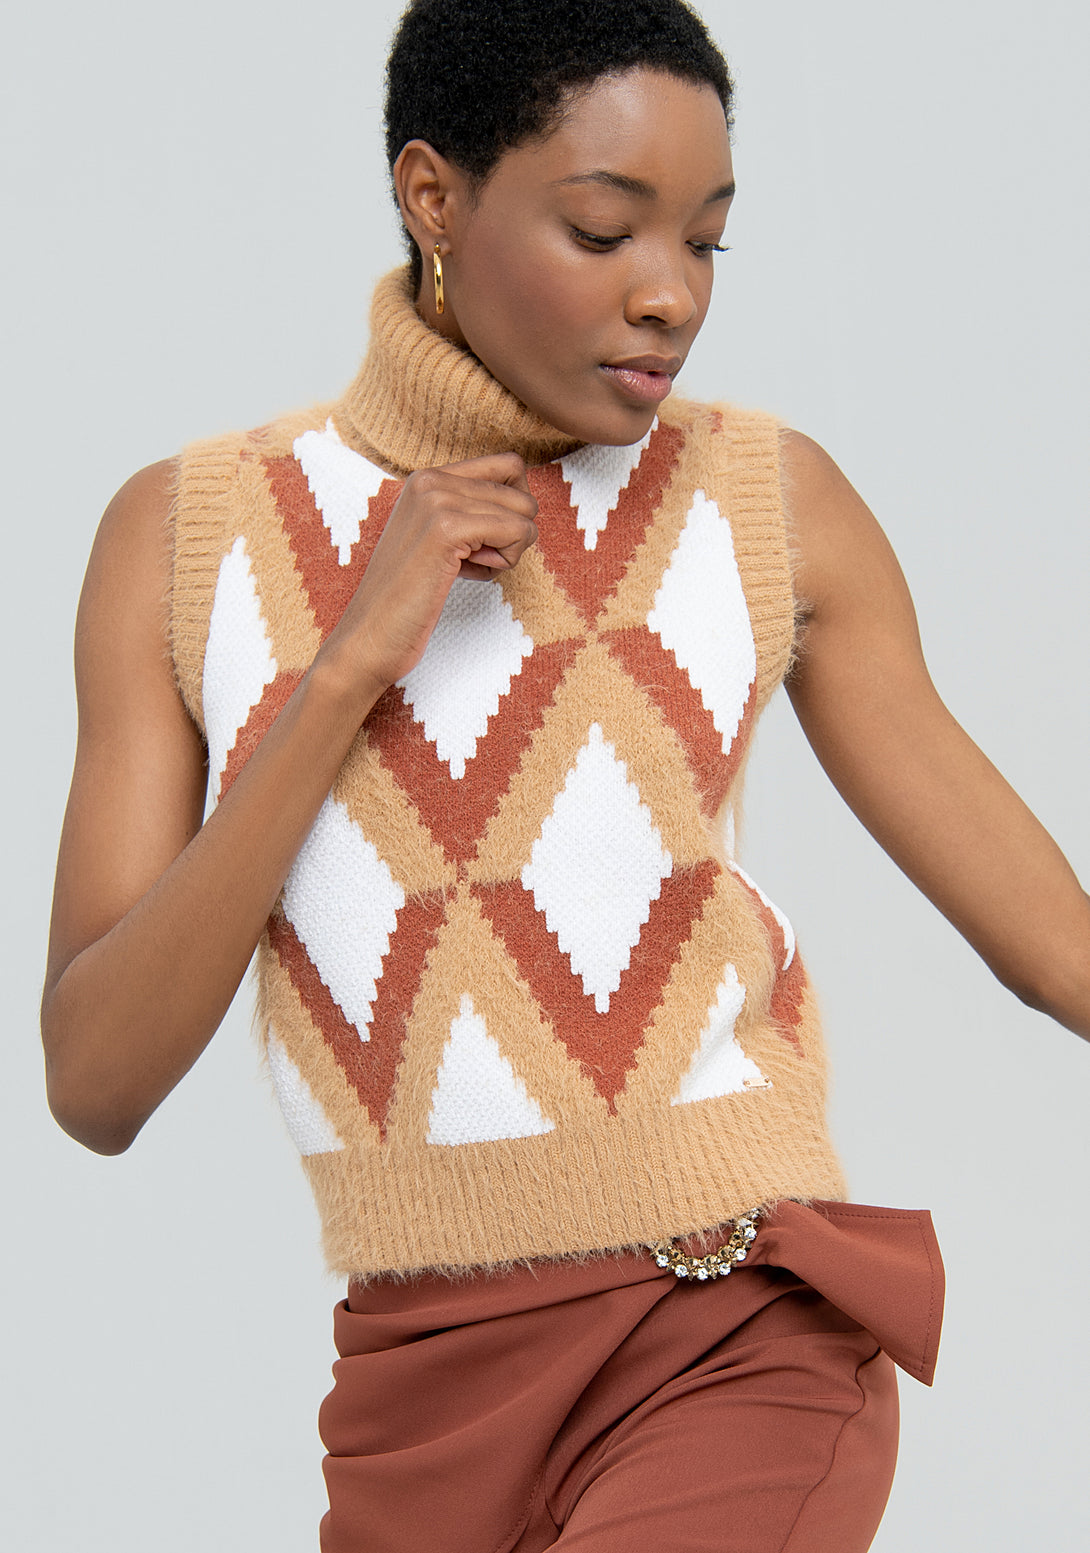 Knitted gilet regular fit with diamond shape pattern